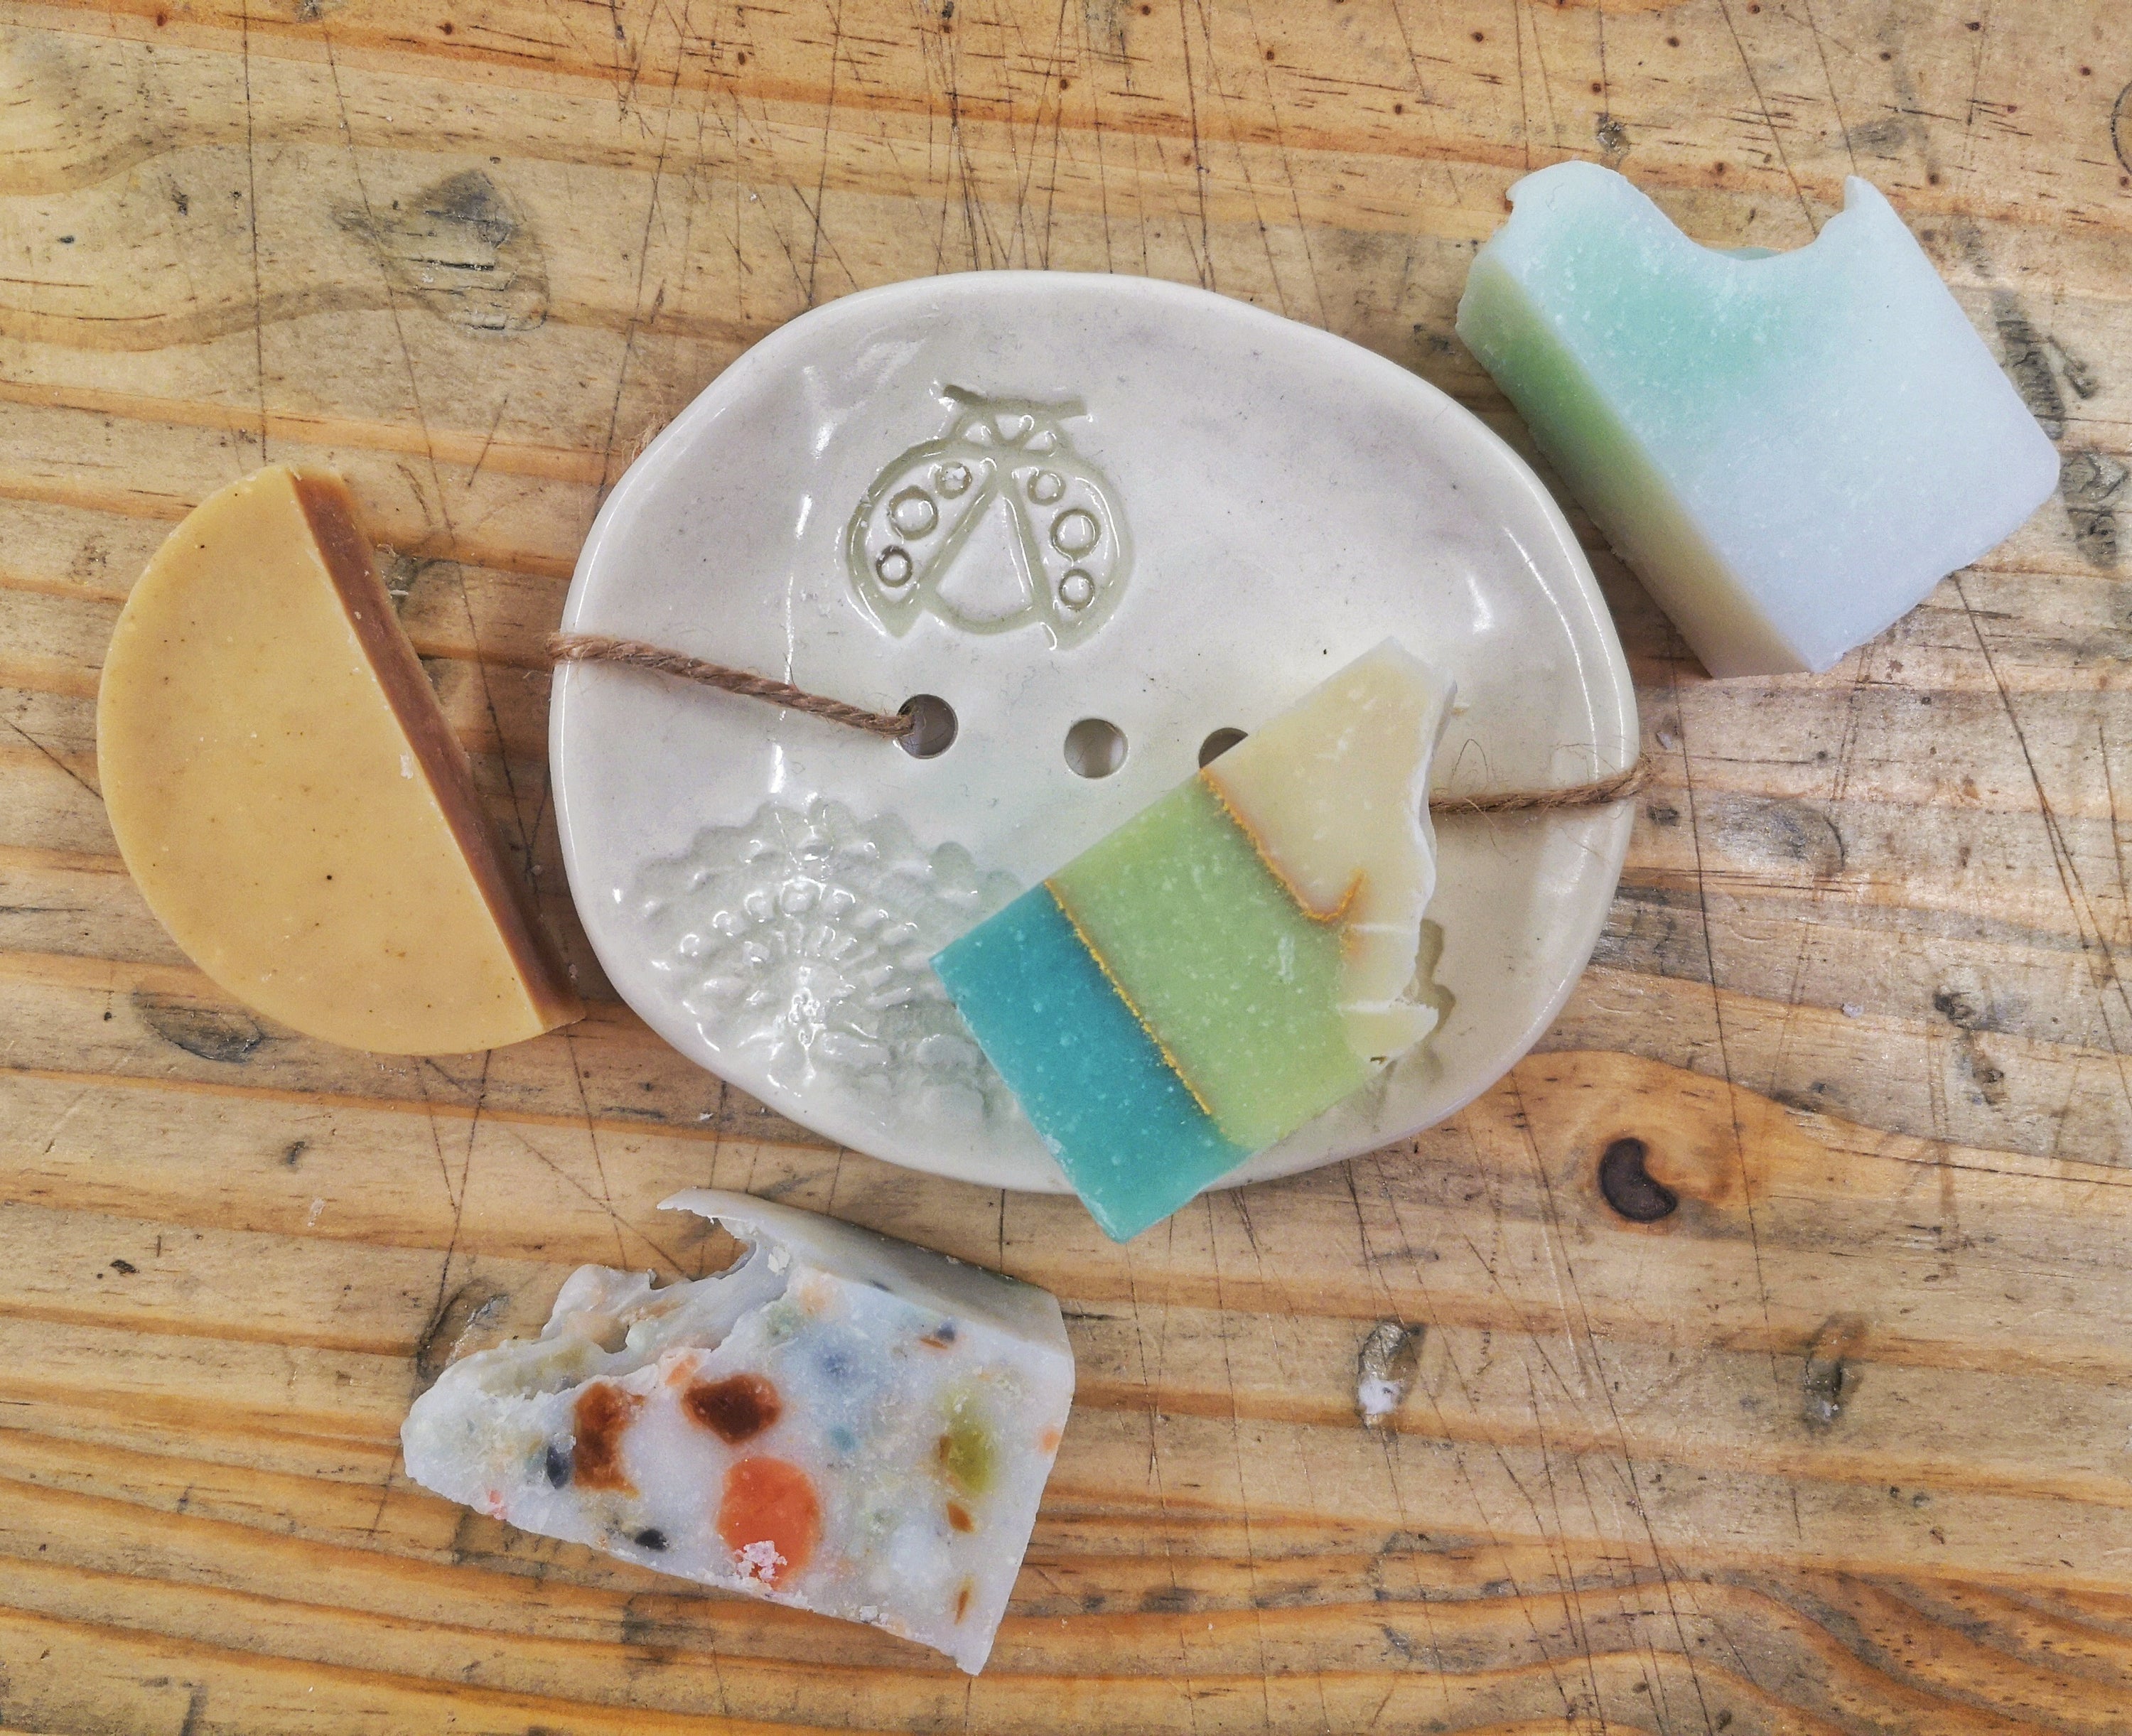 Get The Most Out Of Your Bar Of Soap!